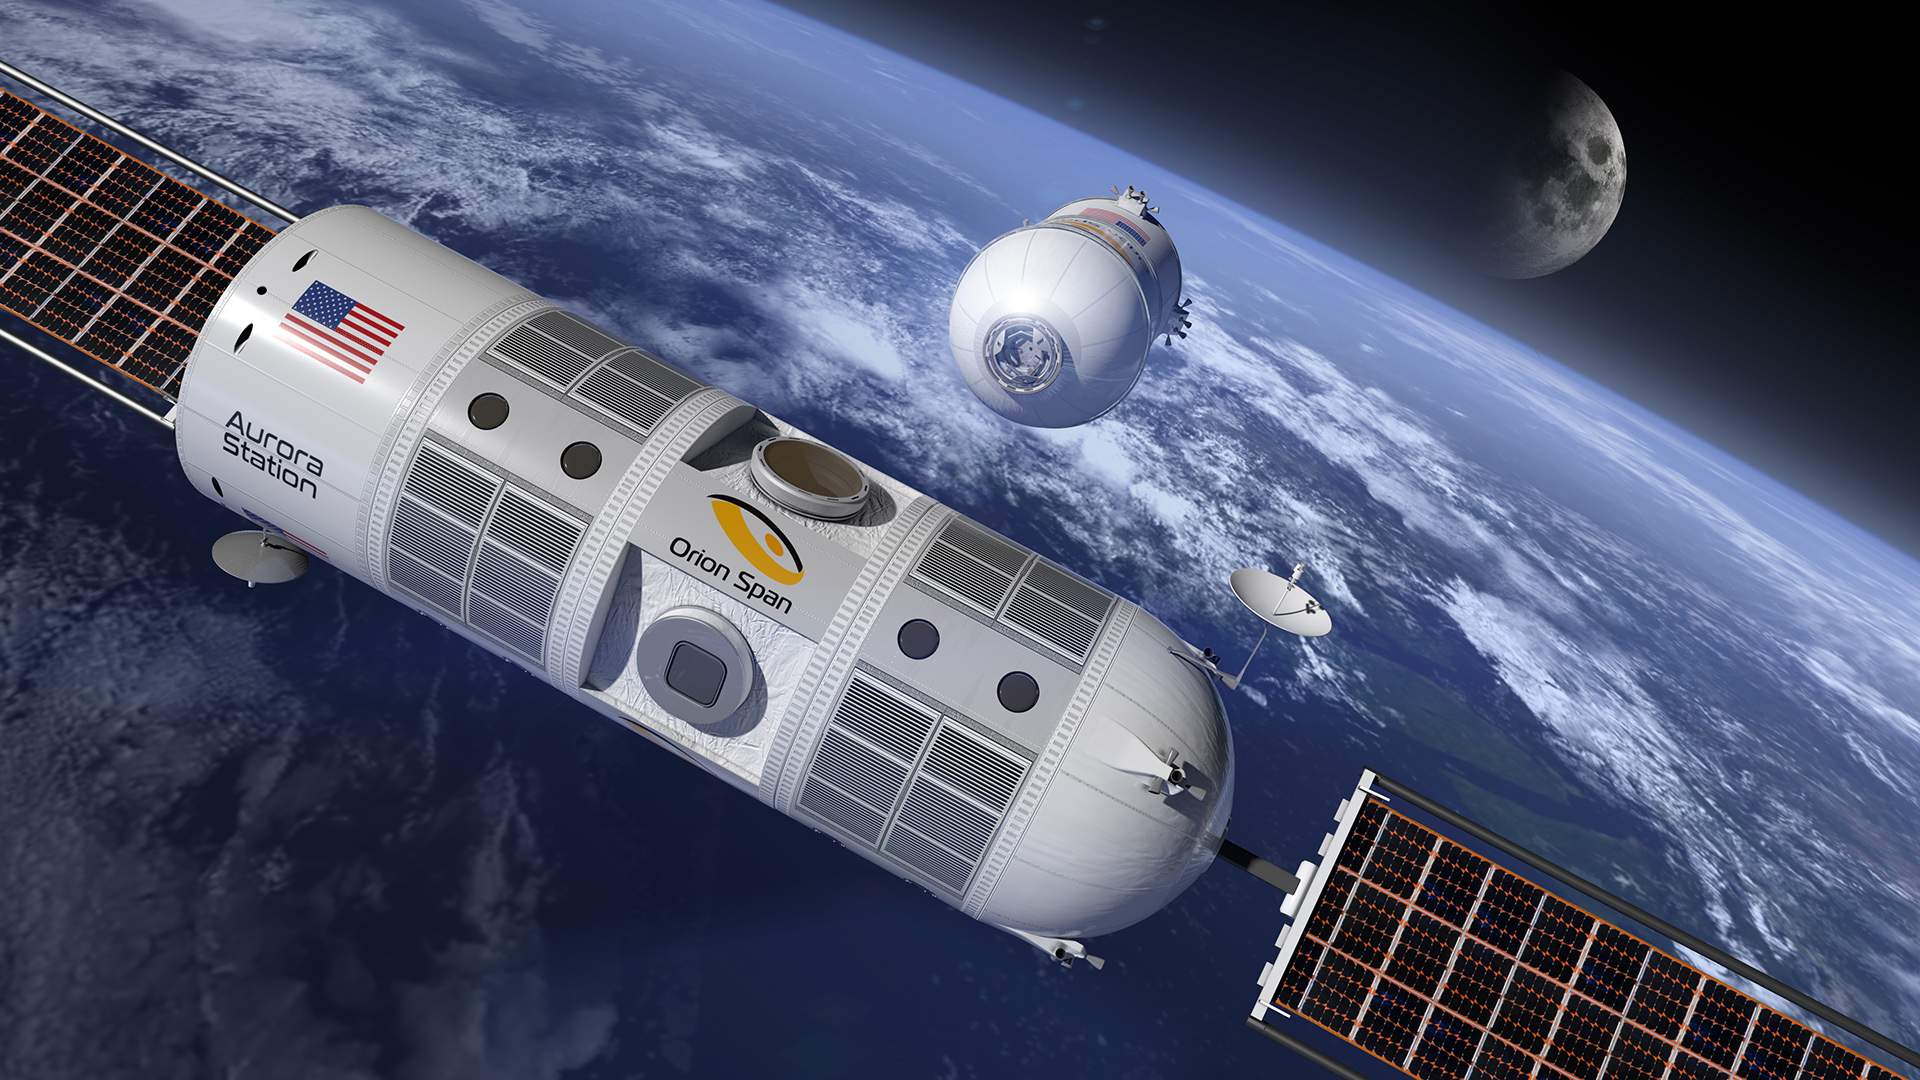 The World's First Luxury Space Hotel Is Set to Open in 2022